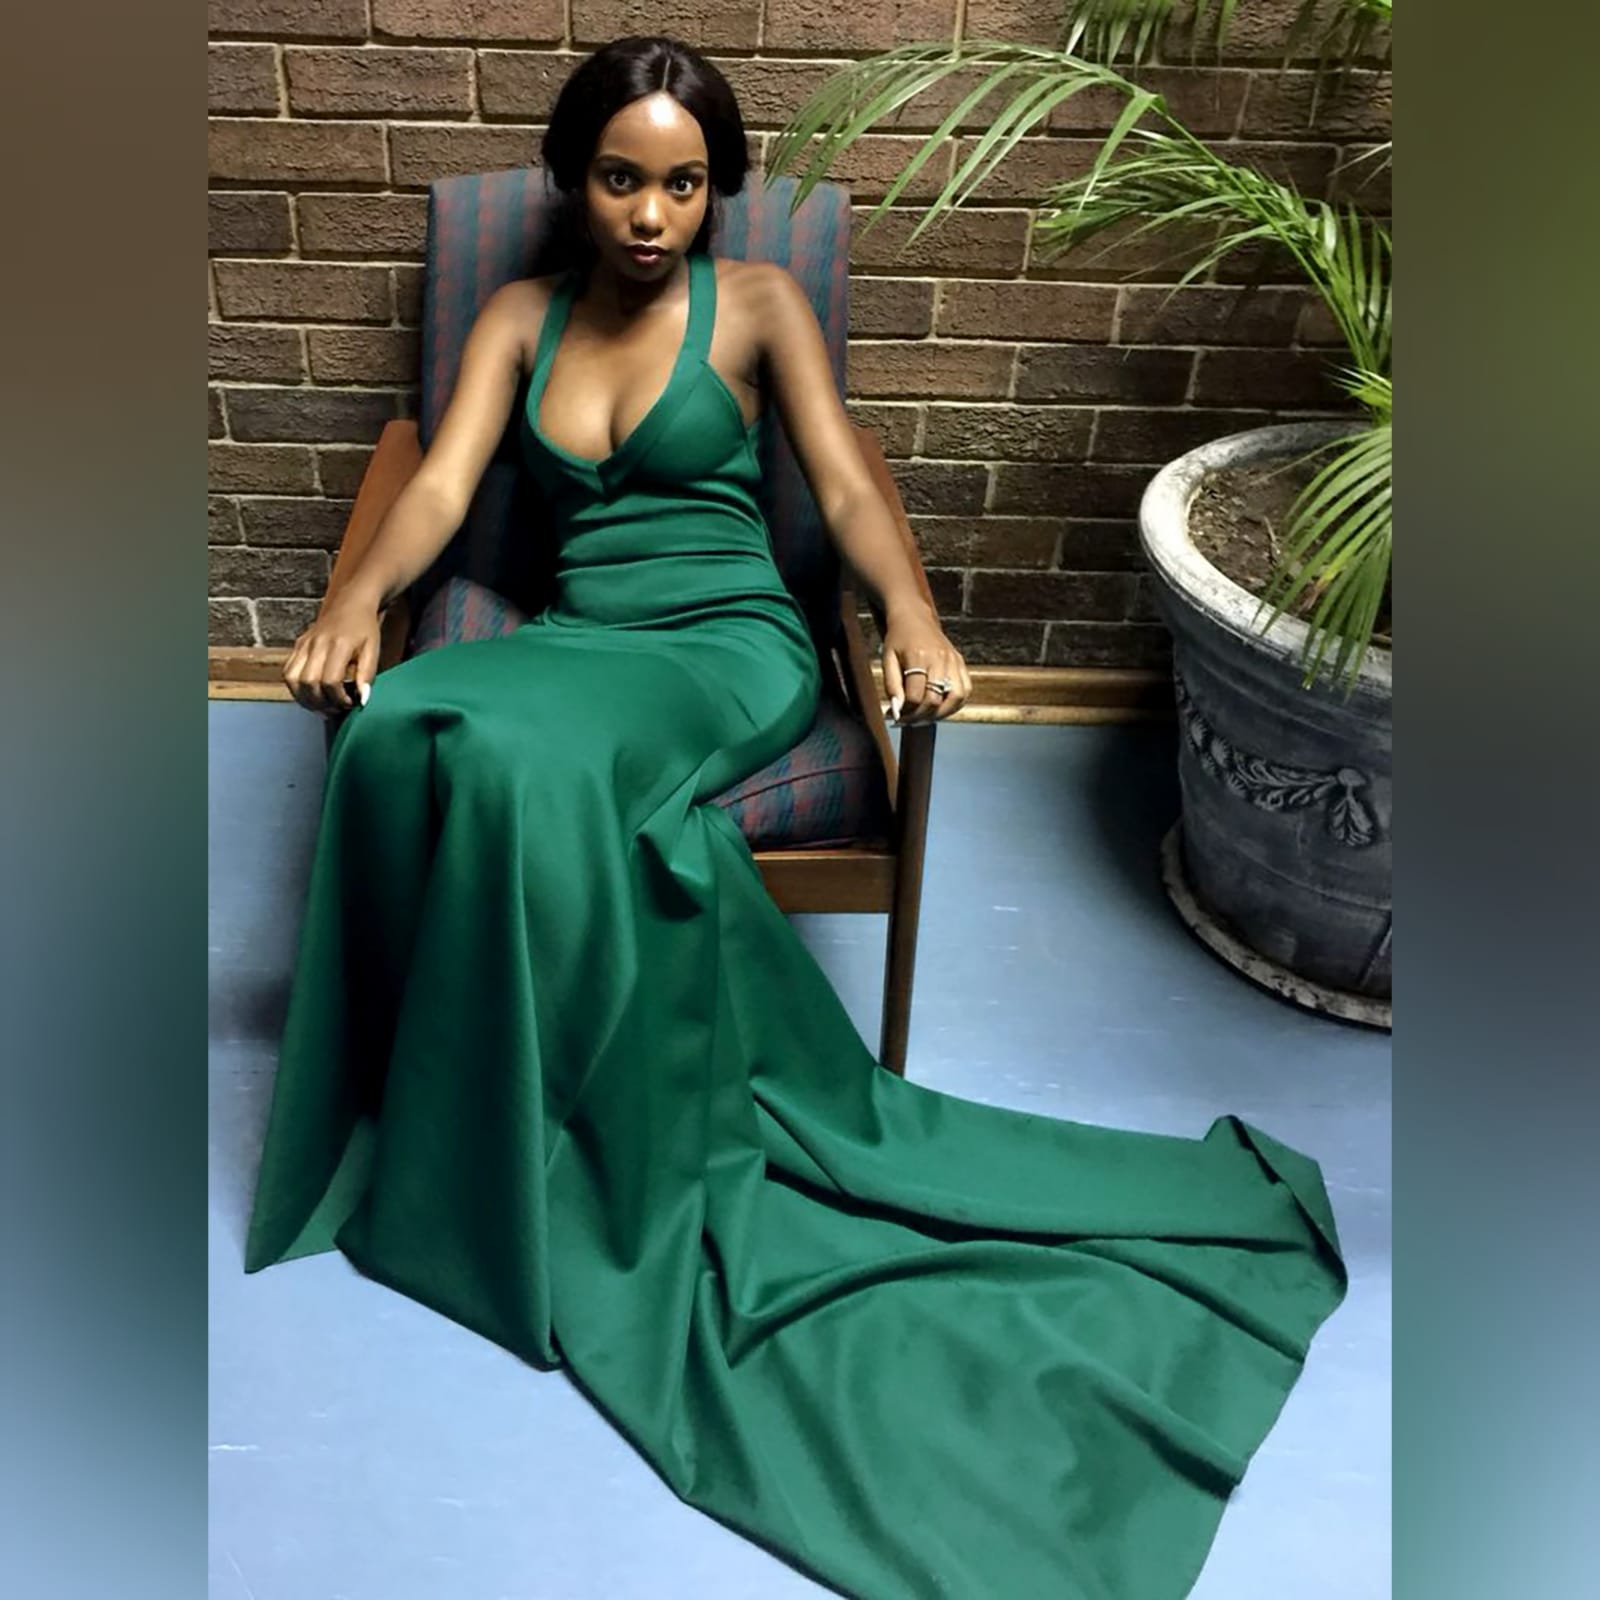 Emerald green soft mermaid prom dress 3 emerald green soft mermaid prom dress, with a v neckline, low open v back with pleated detail and crossed straps, with a train.